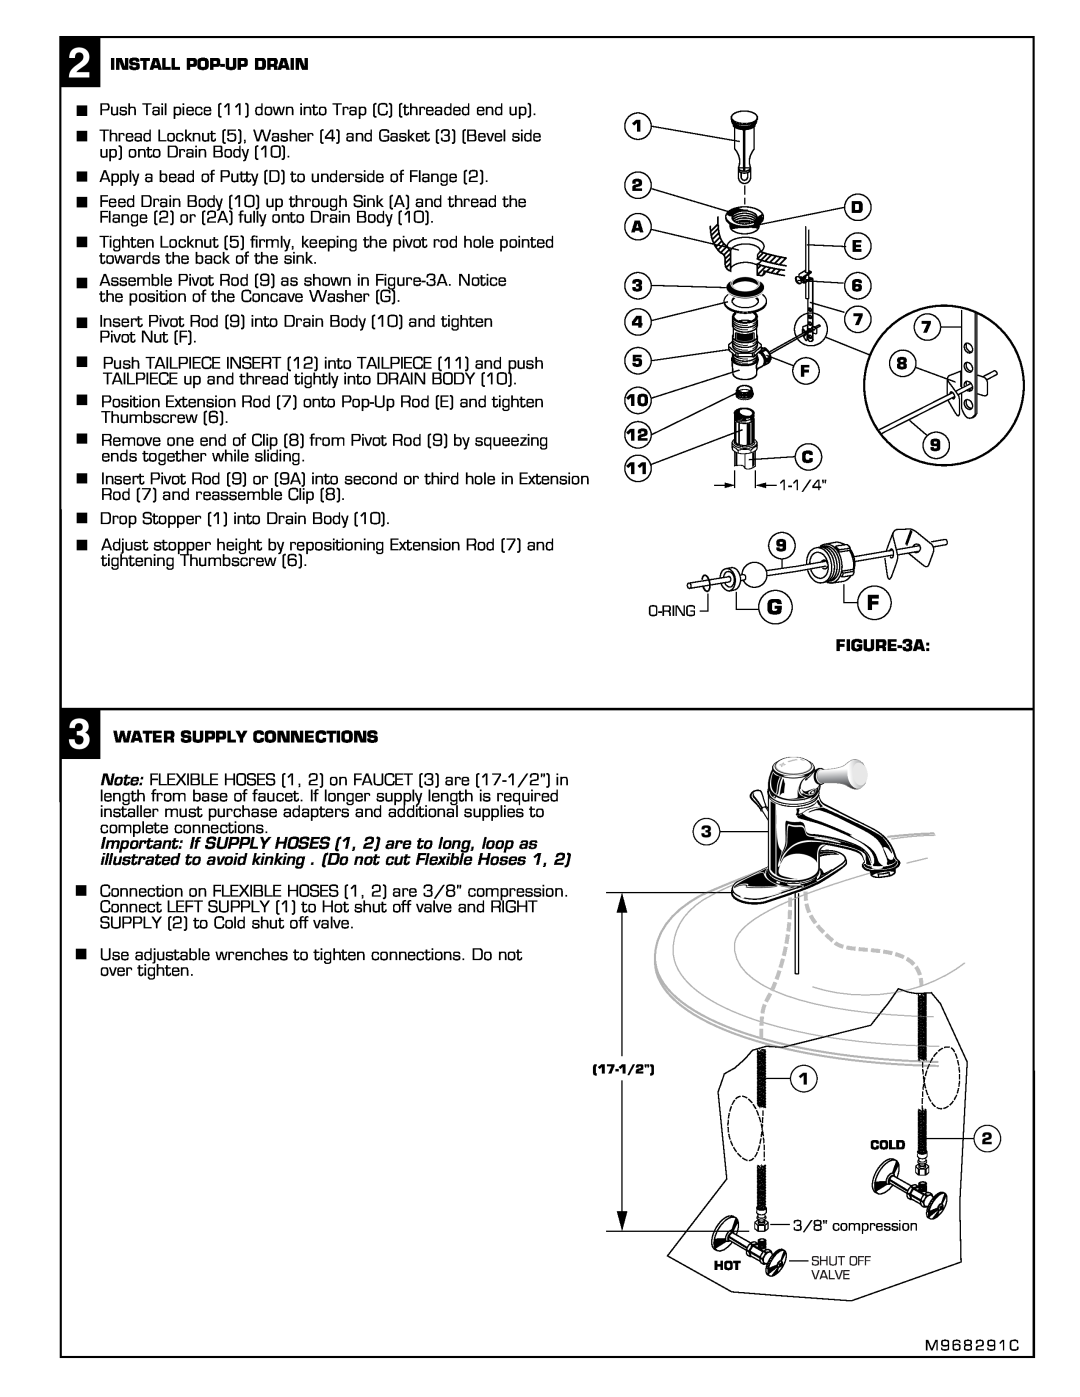 American Standard 2171 installation instructions Install Pop-Updrain, 1 2 A, D E 6 7 F8, Water Supply Connections 